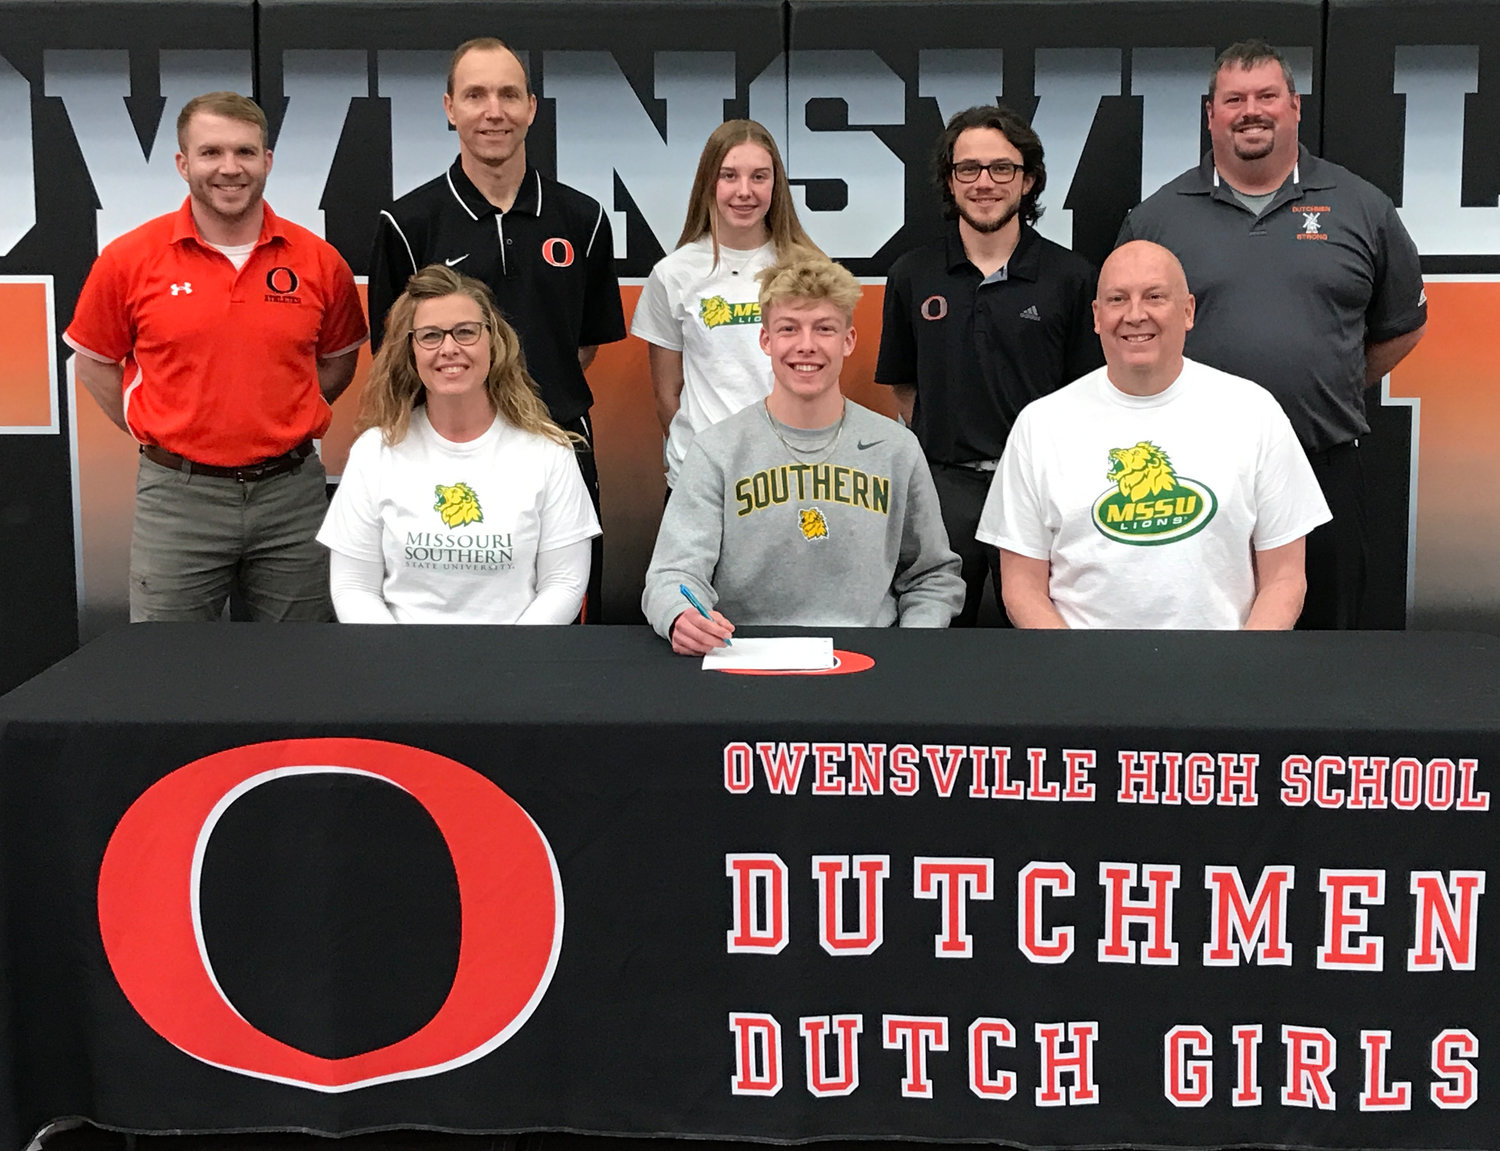 Jacob Breedlove (seated in center) signs his National Letter of Intent to continue his athletic and academic pursuits at Missouri Southern State University (MSSU) in Joplin.